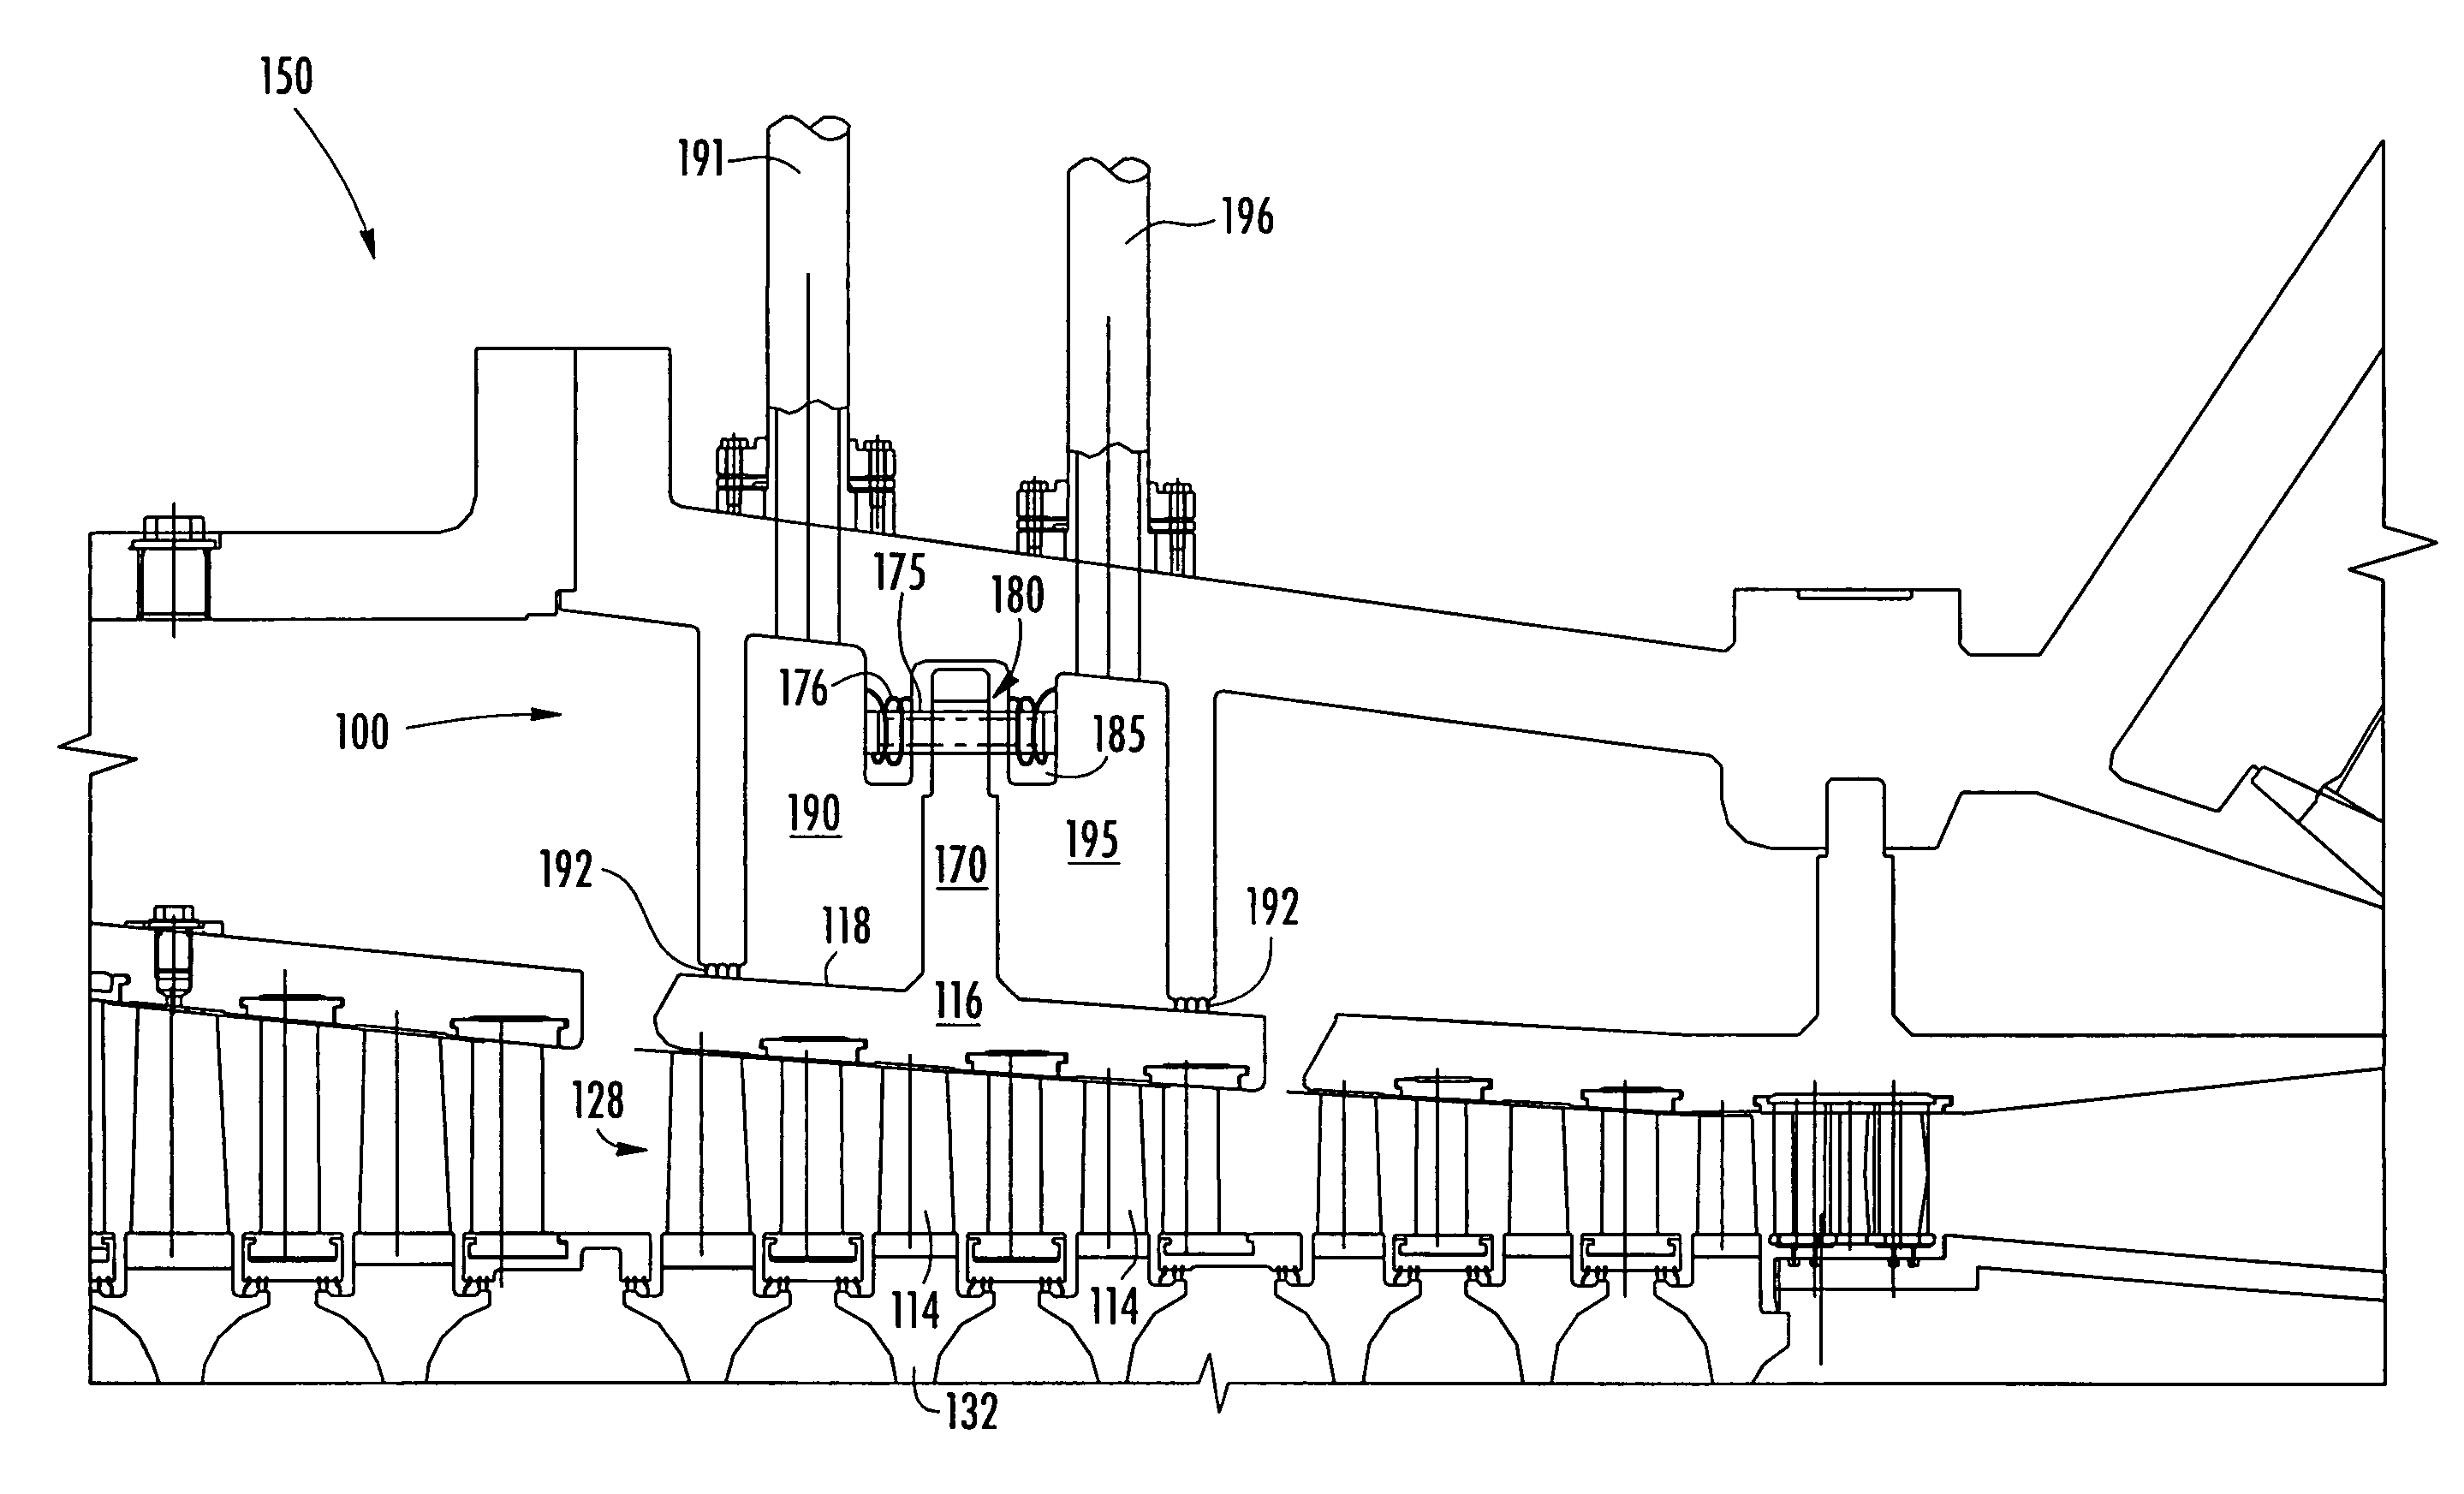 Blade clearance system for a turbine engine